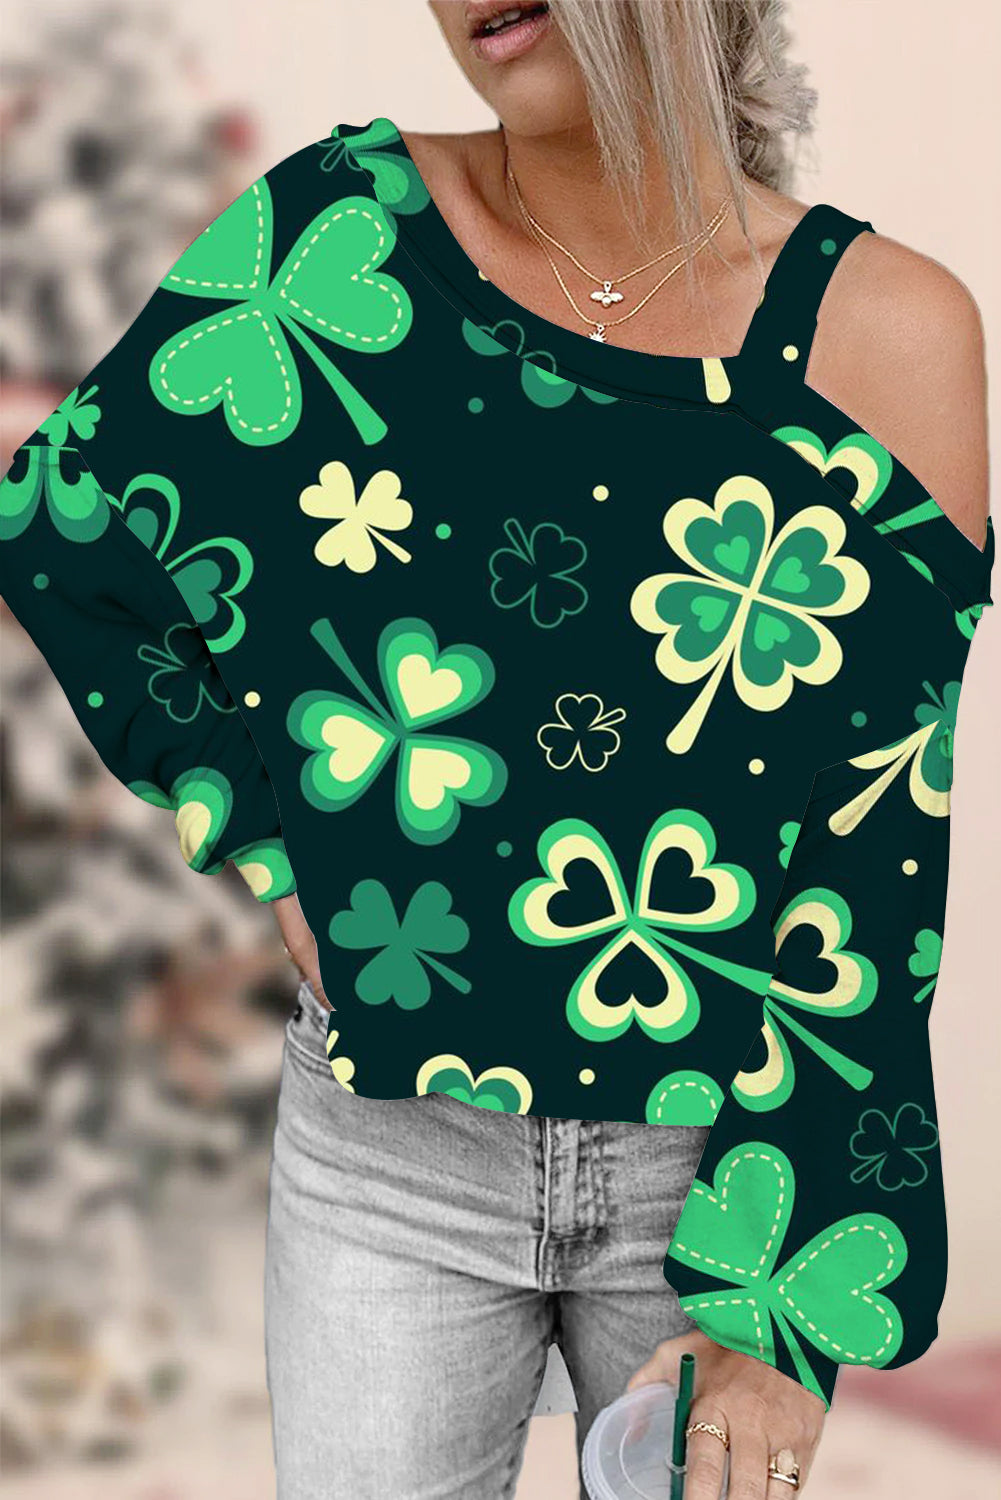 Casual Lucky Green Shamrocks Printed Off-shoulder Blouse